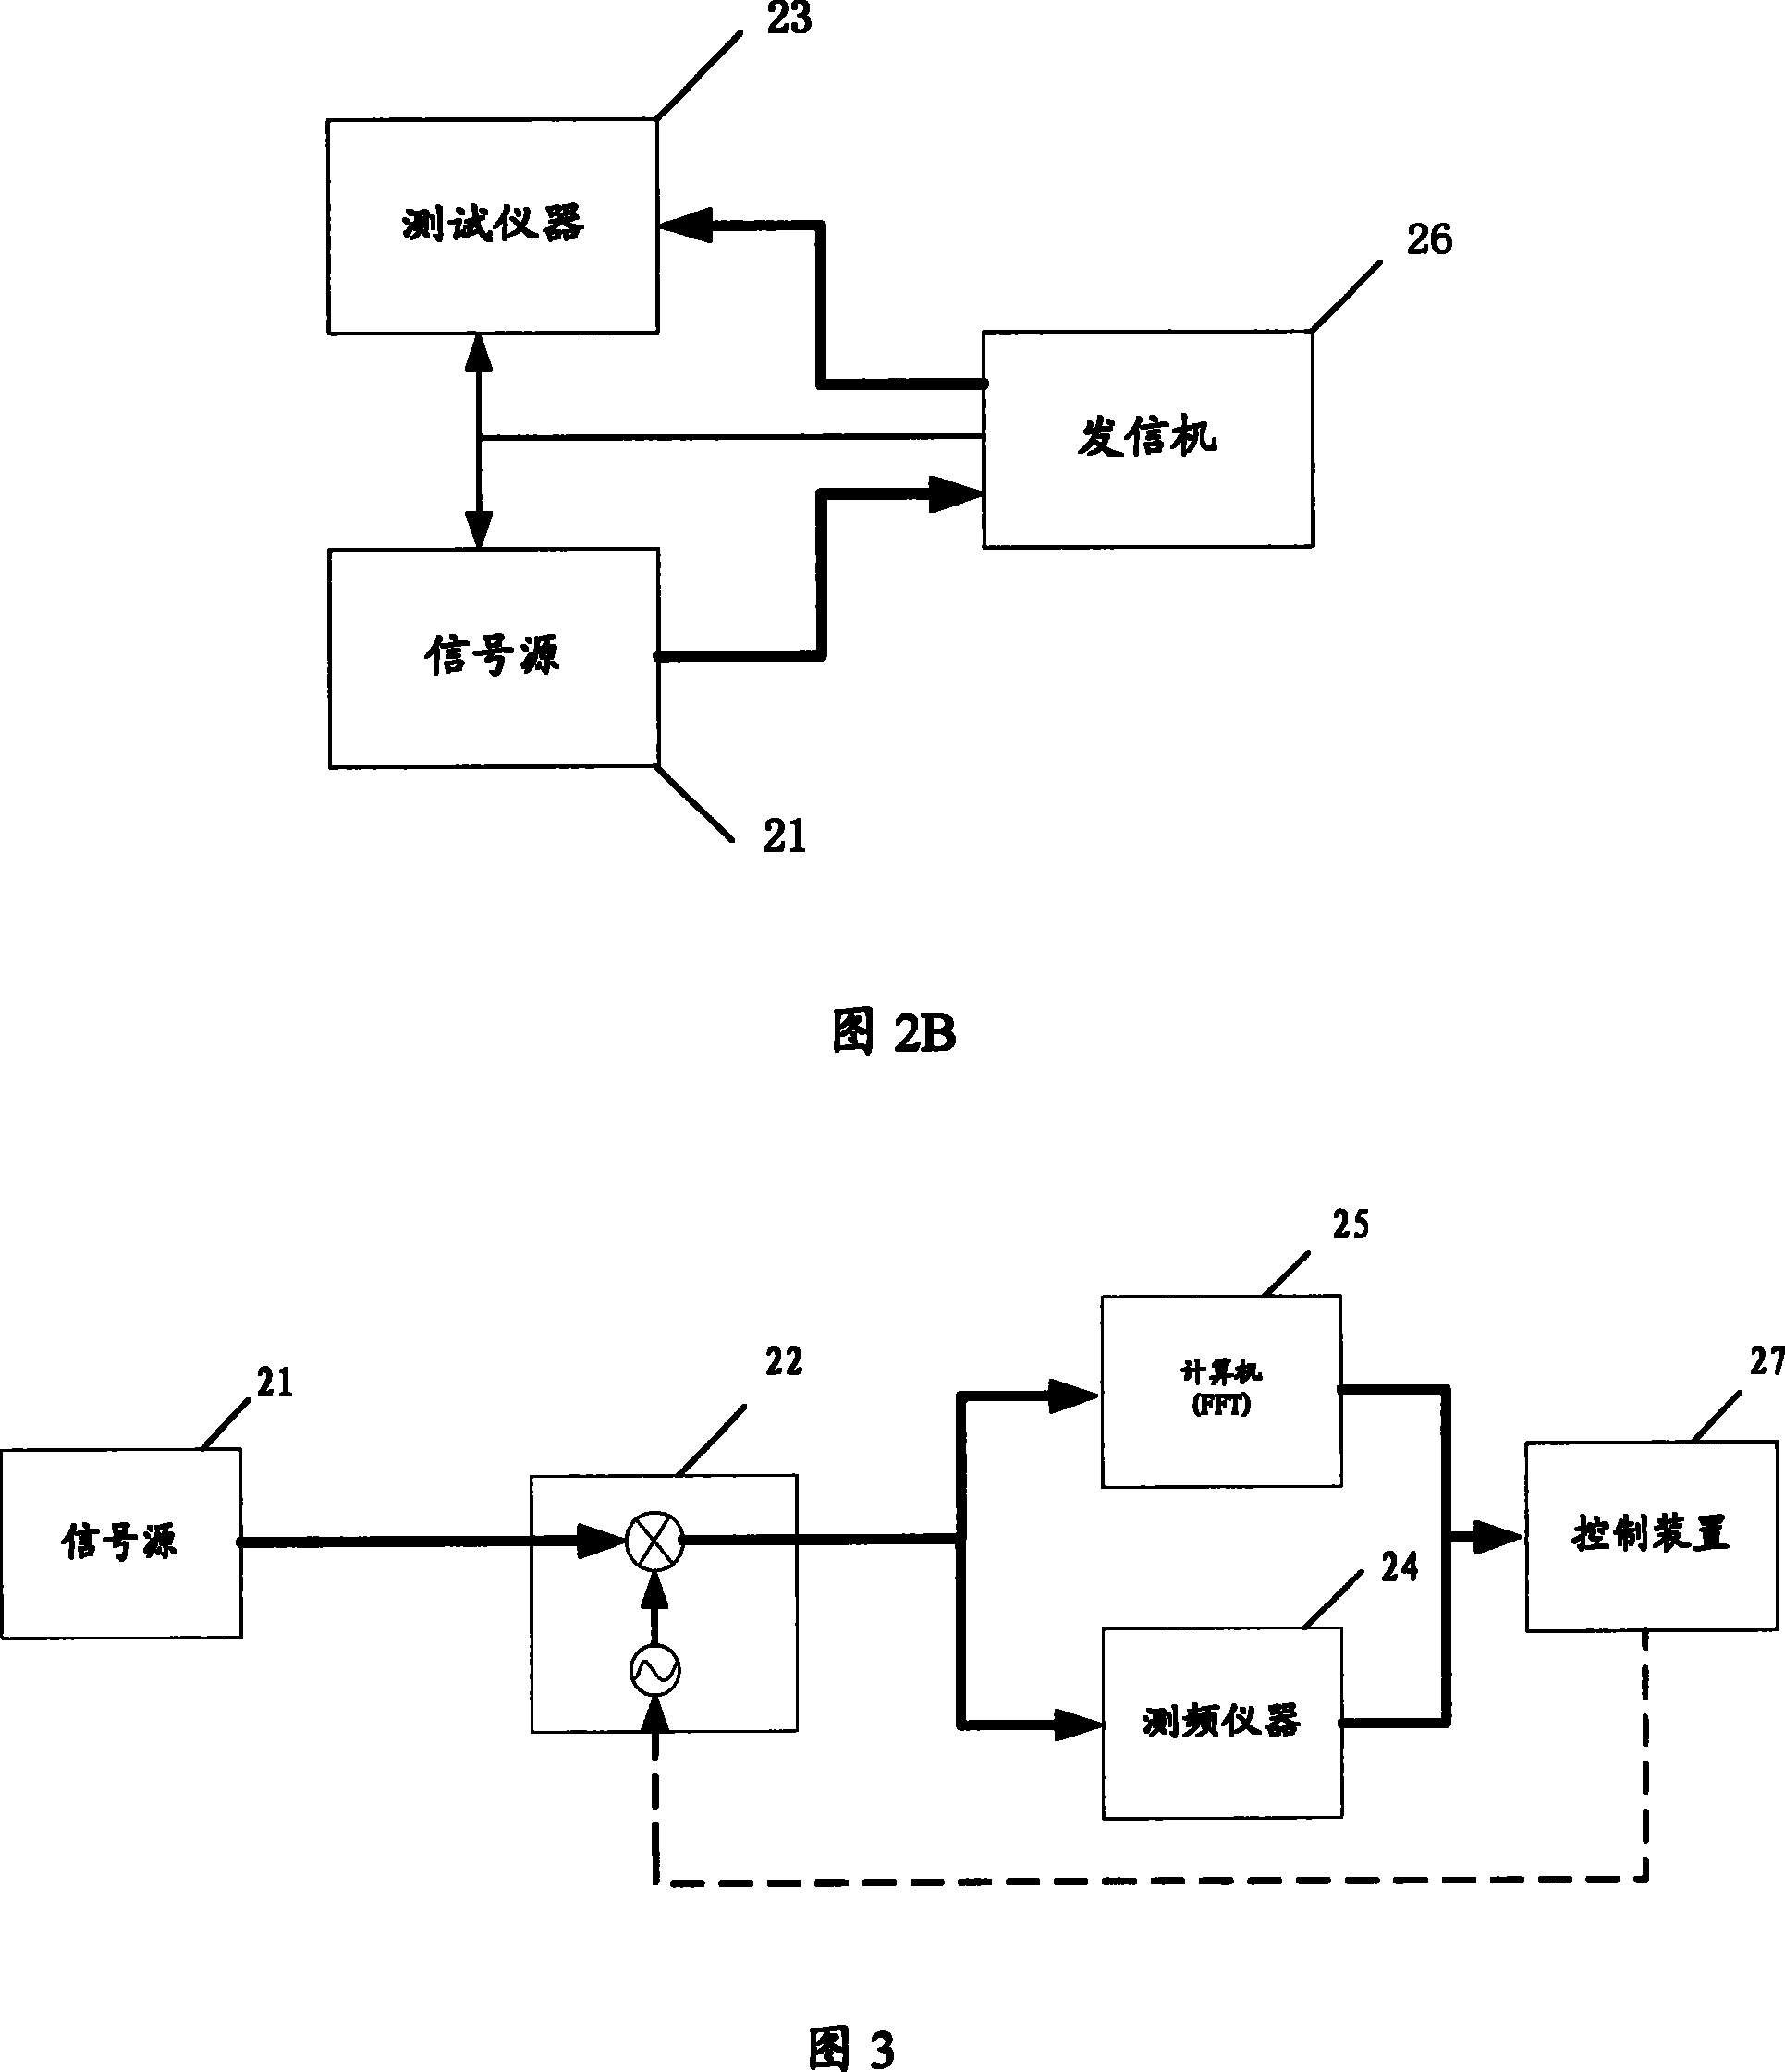 Method and system for signal synchronization between receiver-transmitter and instrument